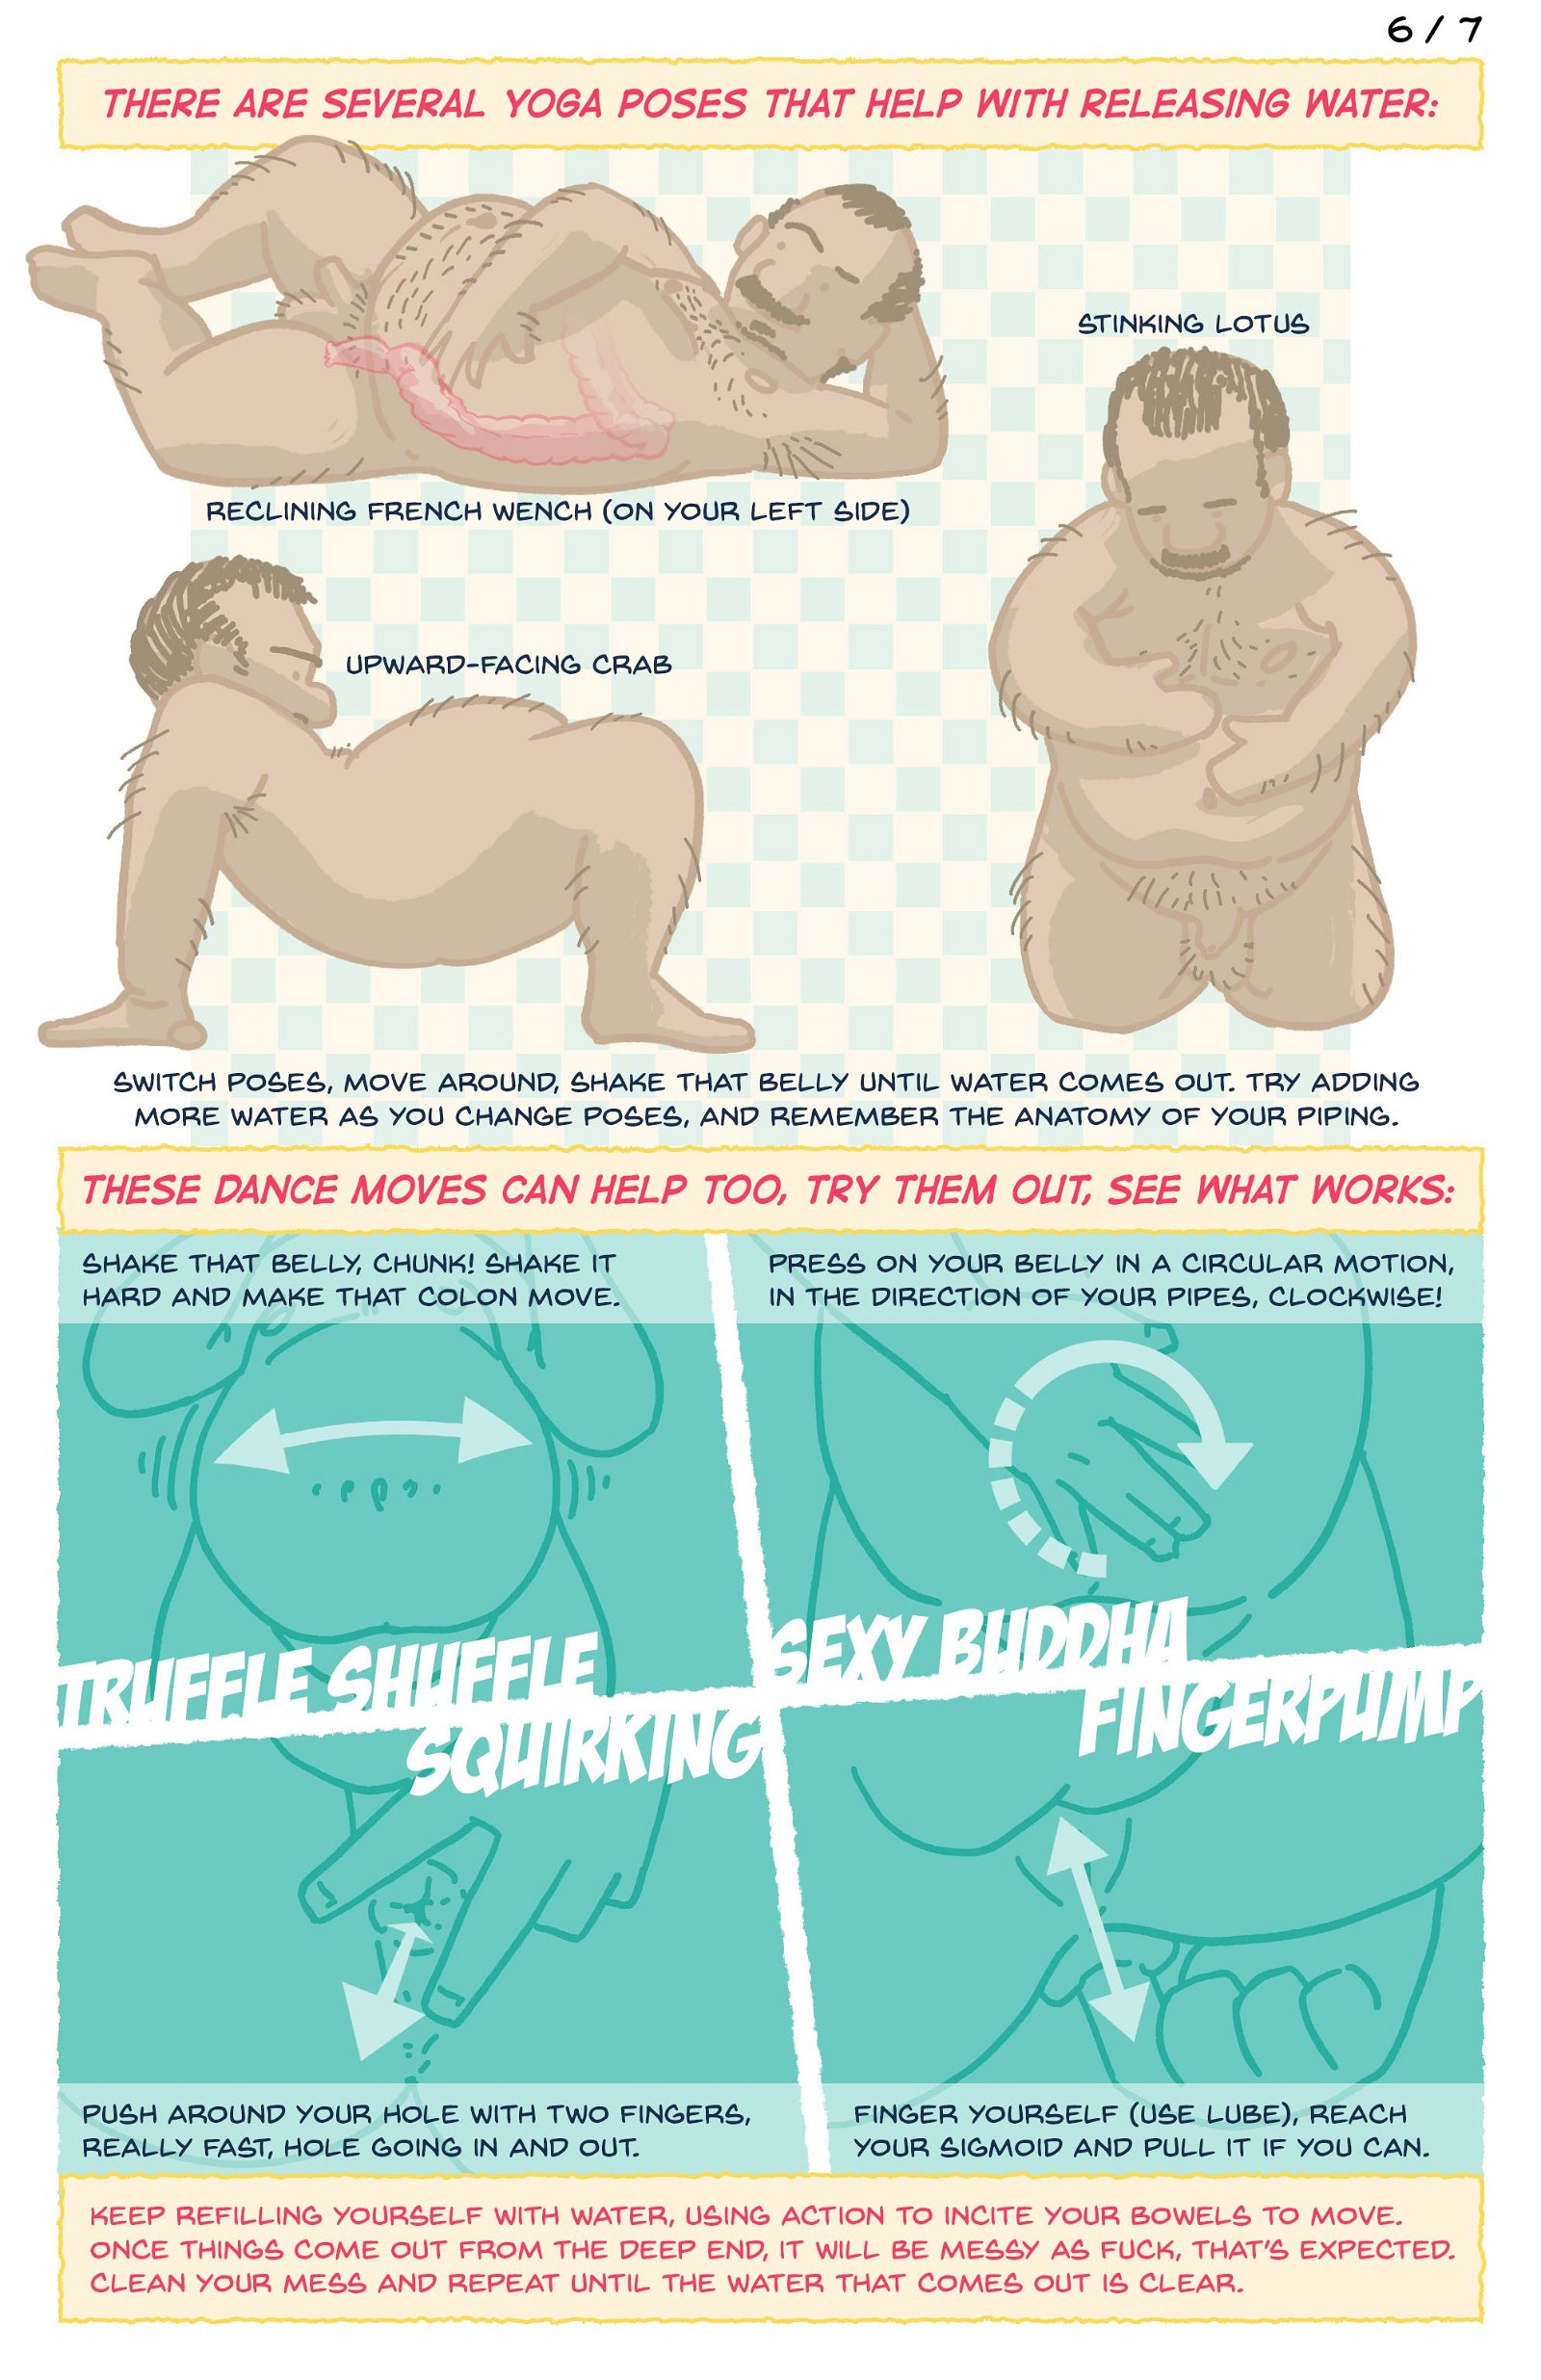 Watch the Photo by Hosiroma with the username @Hosiroma, posted on October 31, 2018 and the text says 'h0nchkr0w:


dead-stray-cat:

blindjaw:
I just finished writing and illustrating this ass-cleaning guide. Please do share it, all good bottoms need to know this information. You can also share the link outside of Tumblr, easy to remember:..'